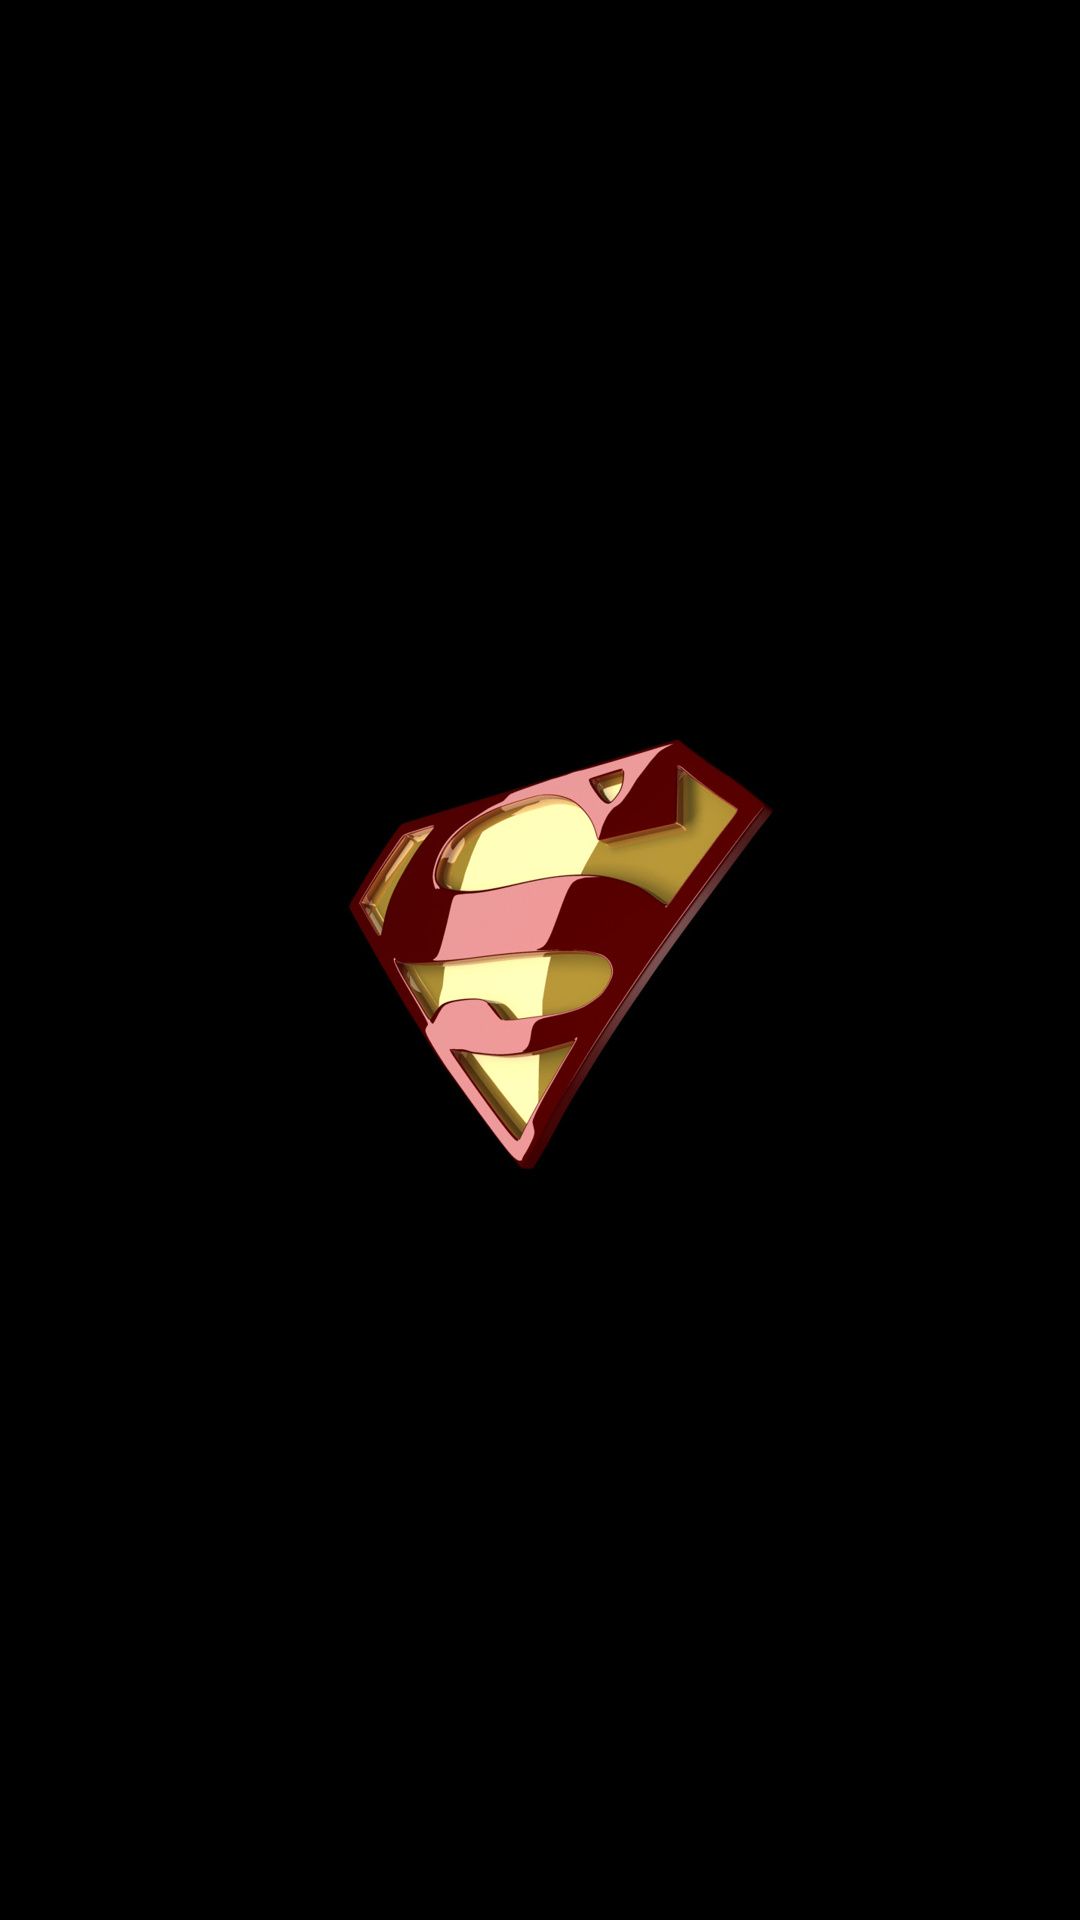 Best Superman HD wallpapers Only for iPhone users - Image Diamond